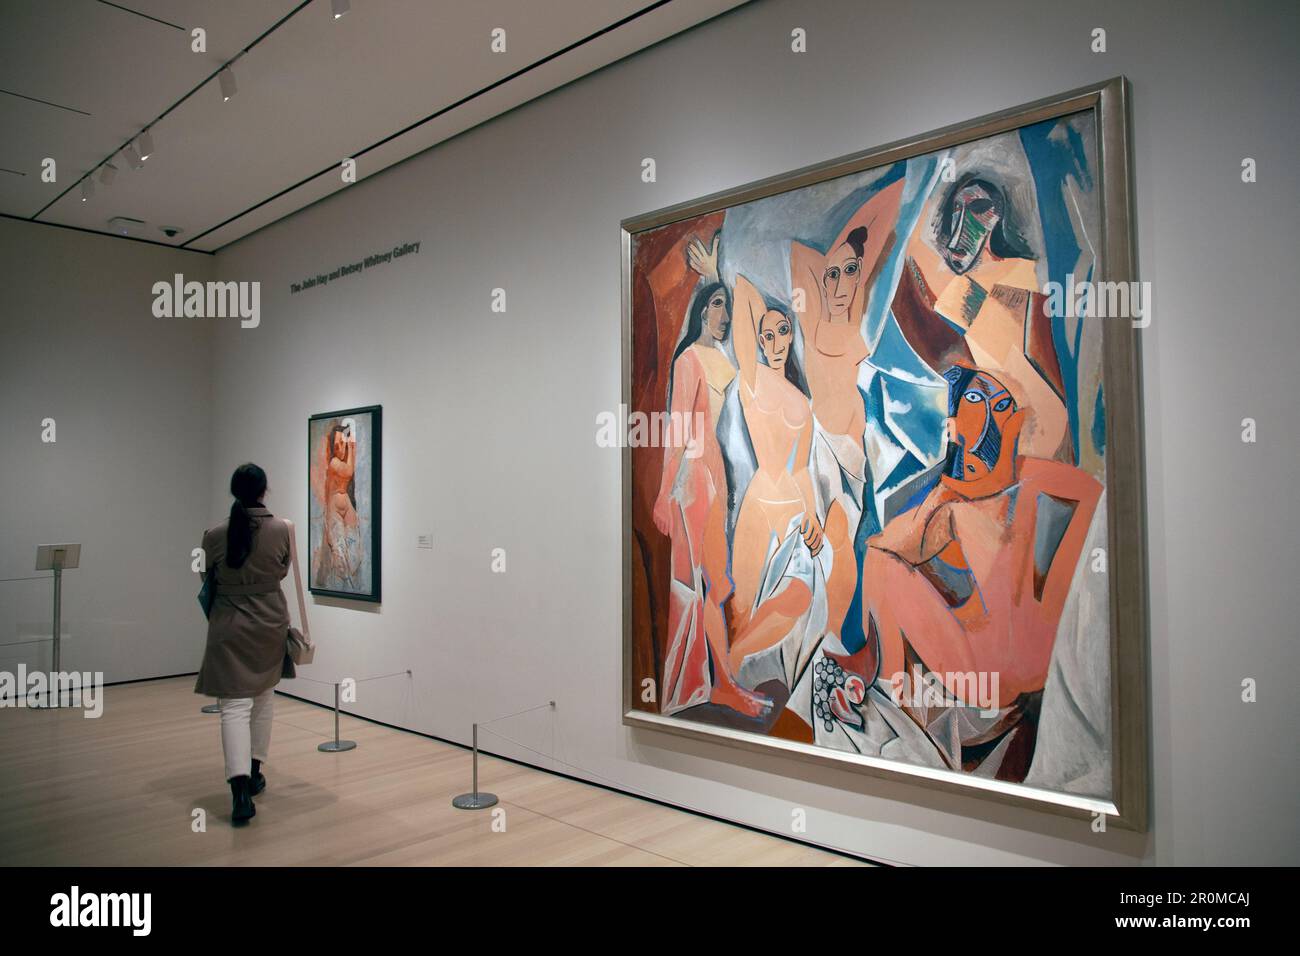 Picasso Artworks including 'Les Demoiselles d'Avignon' in the  John Hay and Betsey Whitney Gallery in MOMA, New York, USA Stock Photo